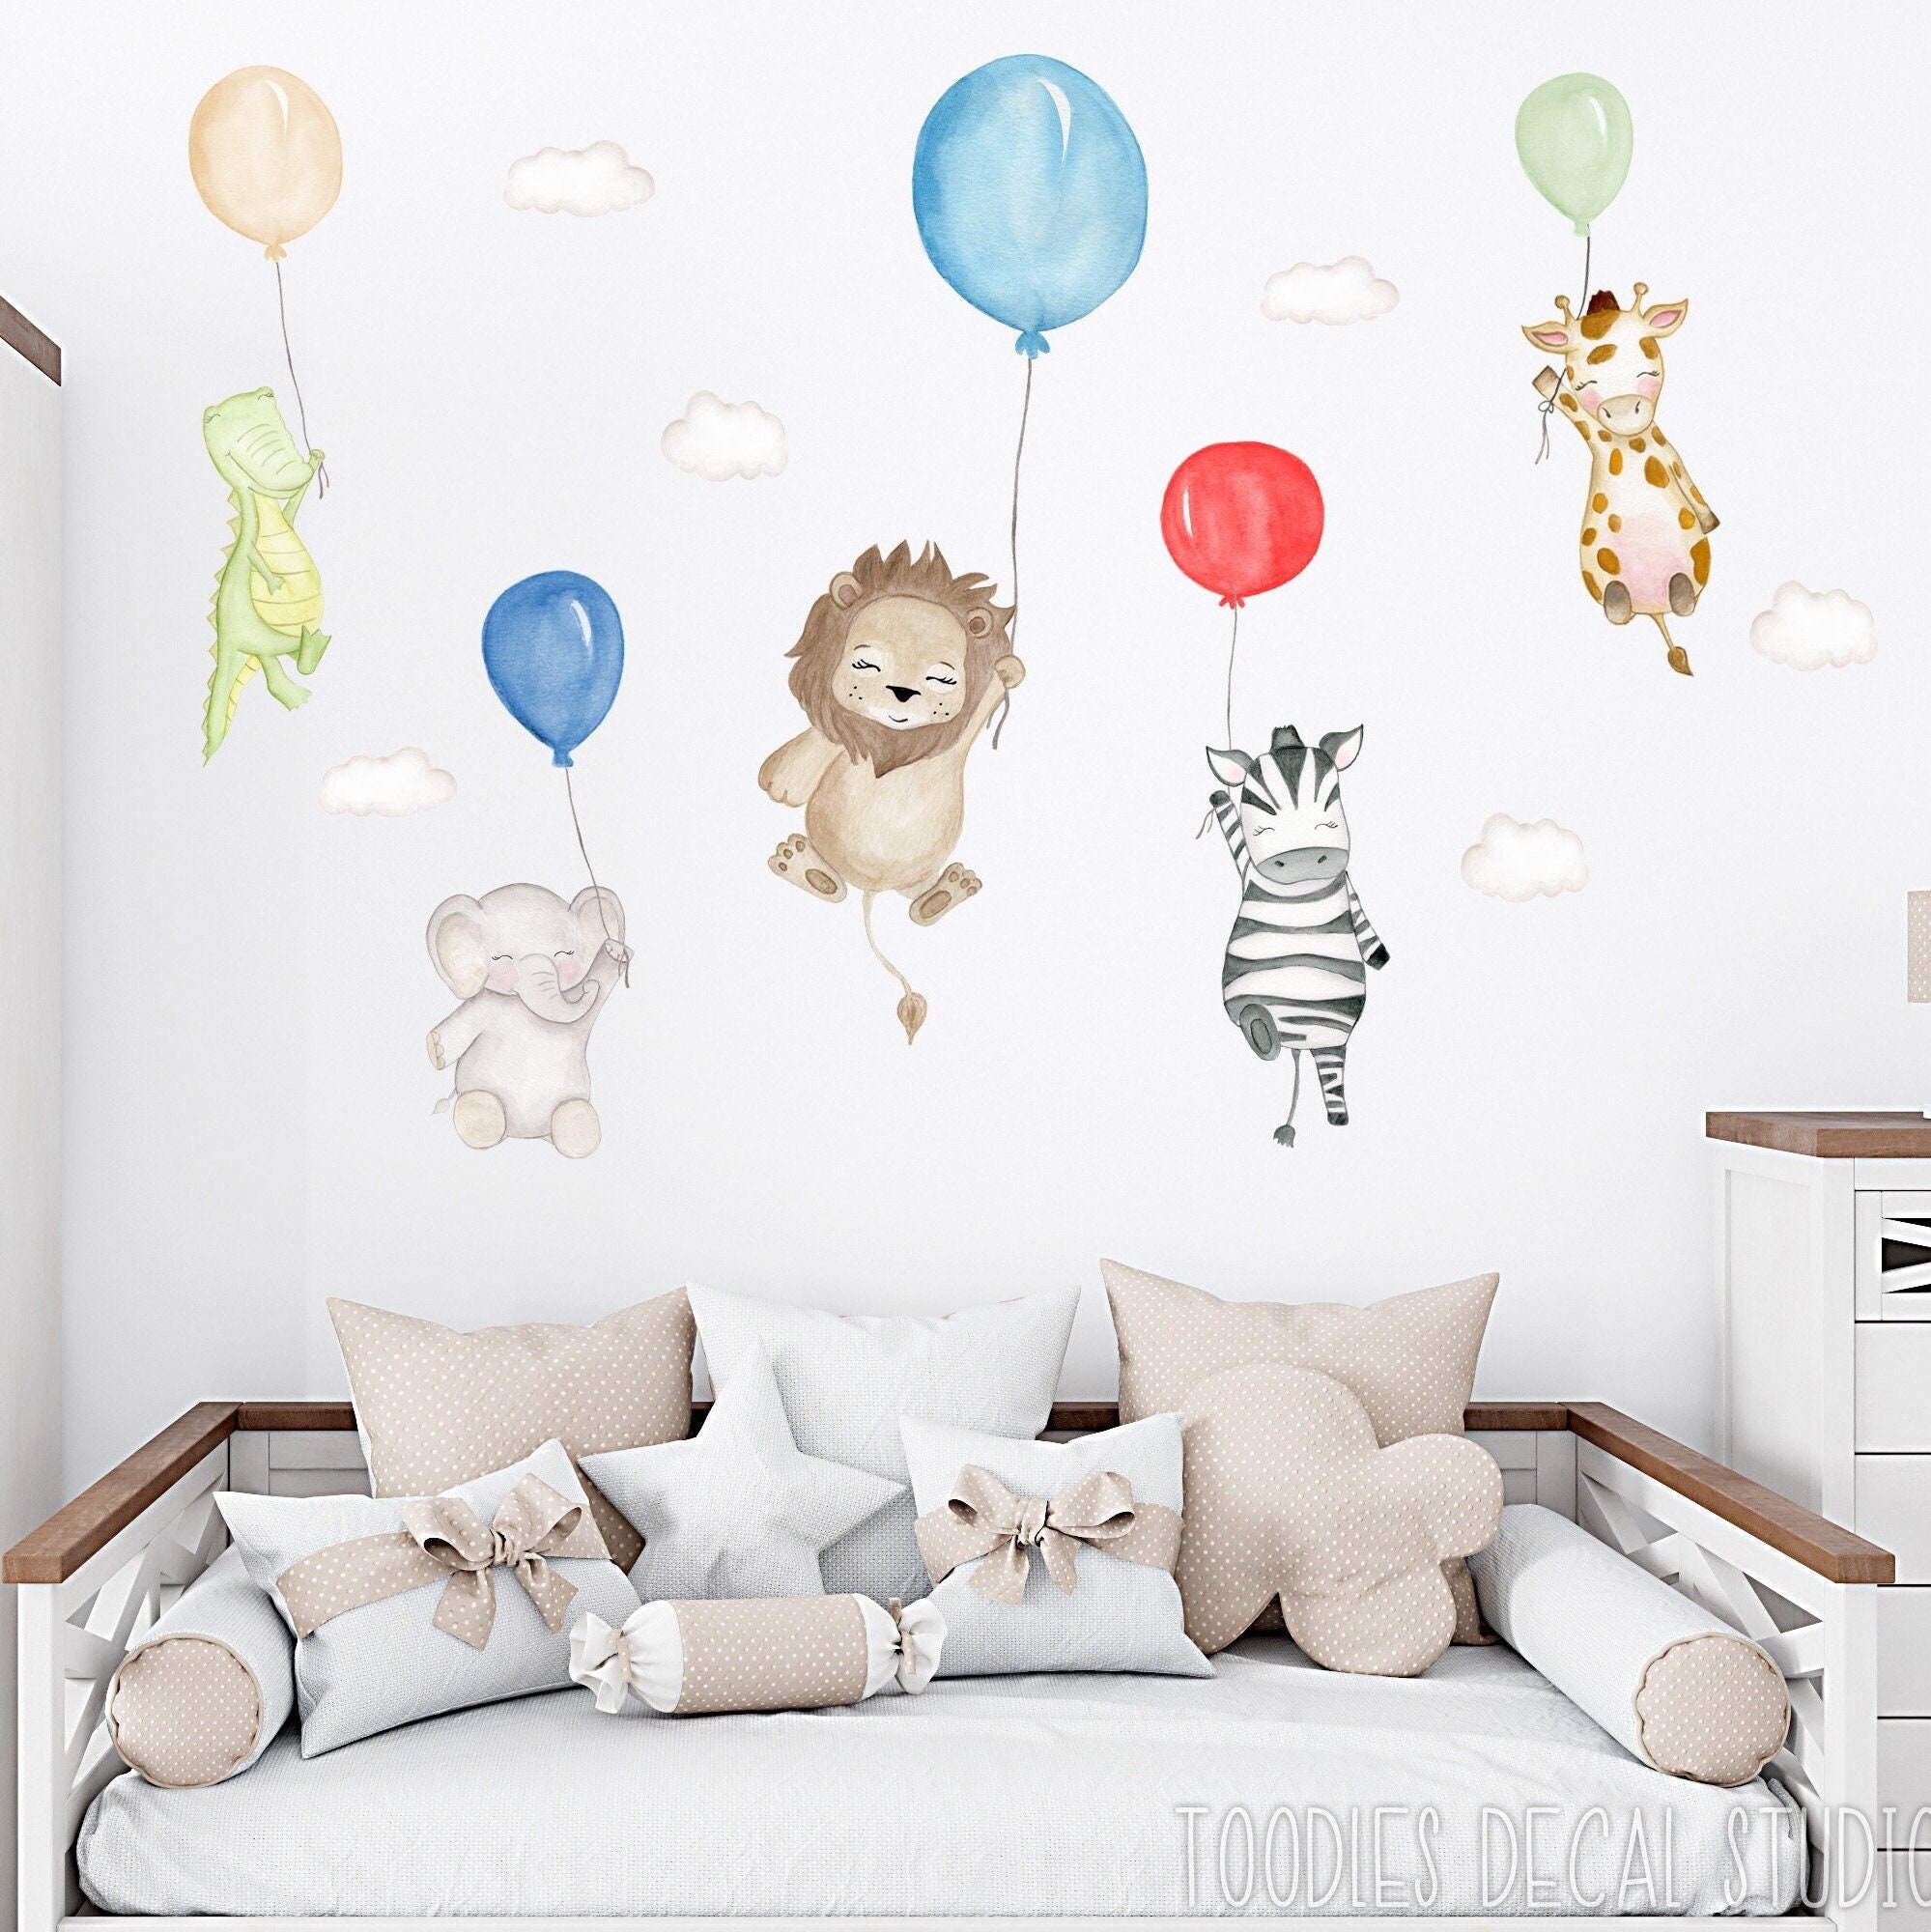 Decoration Supplies, Balloons Tools, Wall Stickers